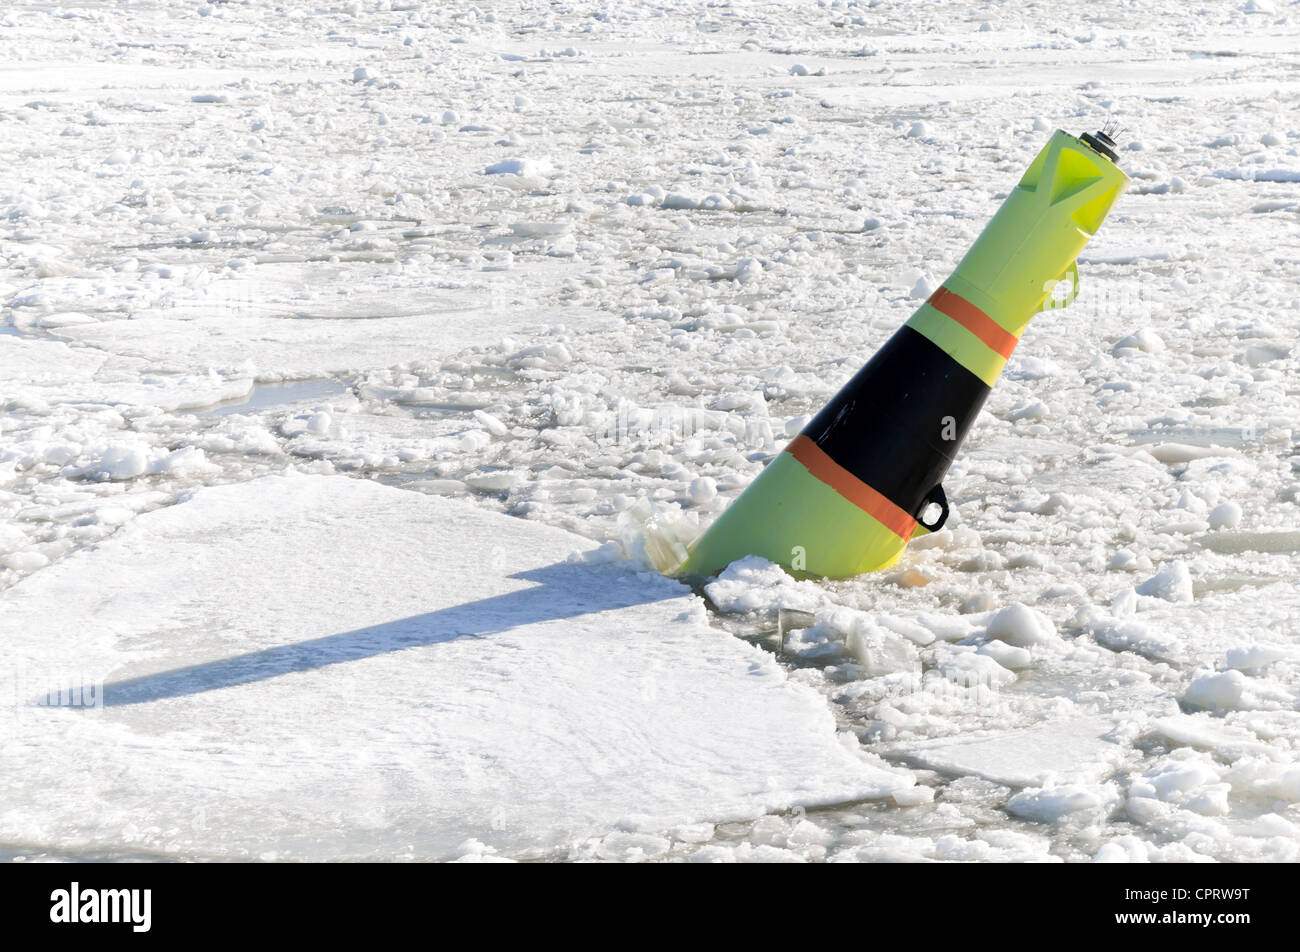 Conical black and yellow buoy on frozen Baltic sea Stock Photo